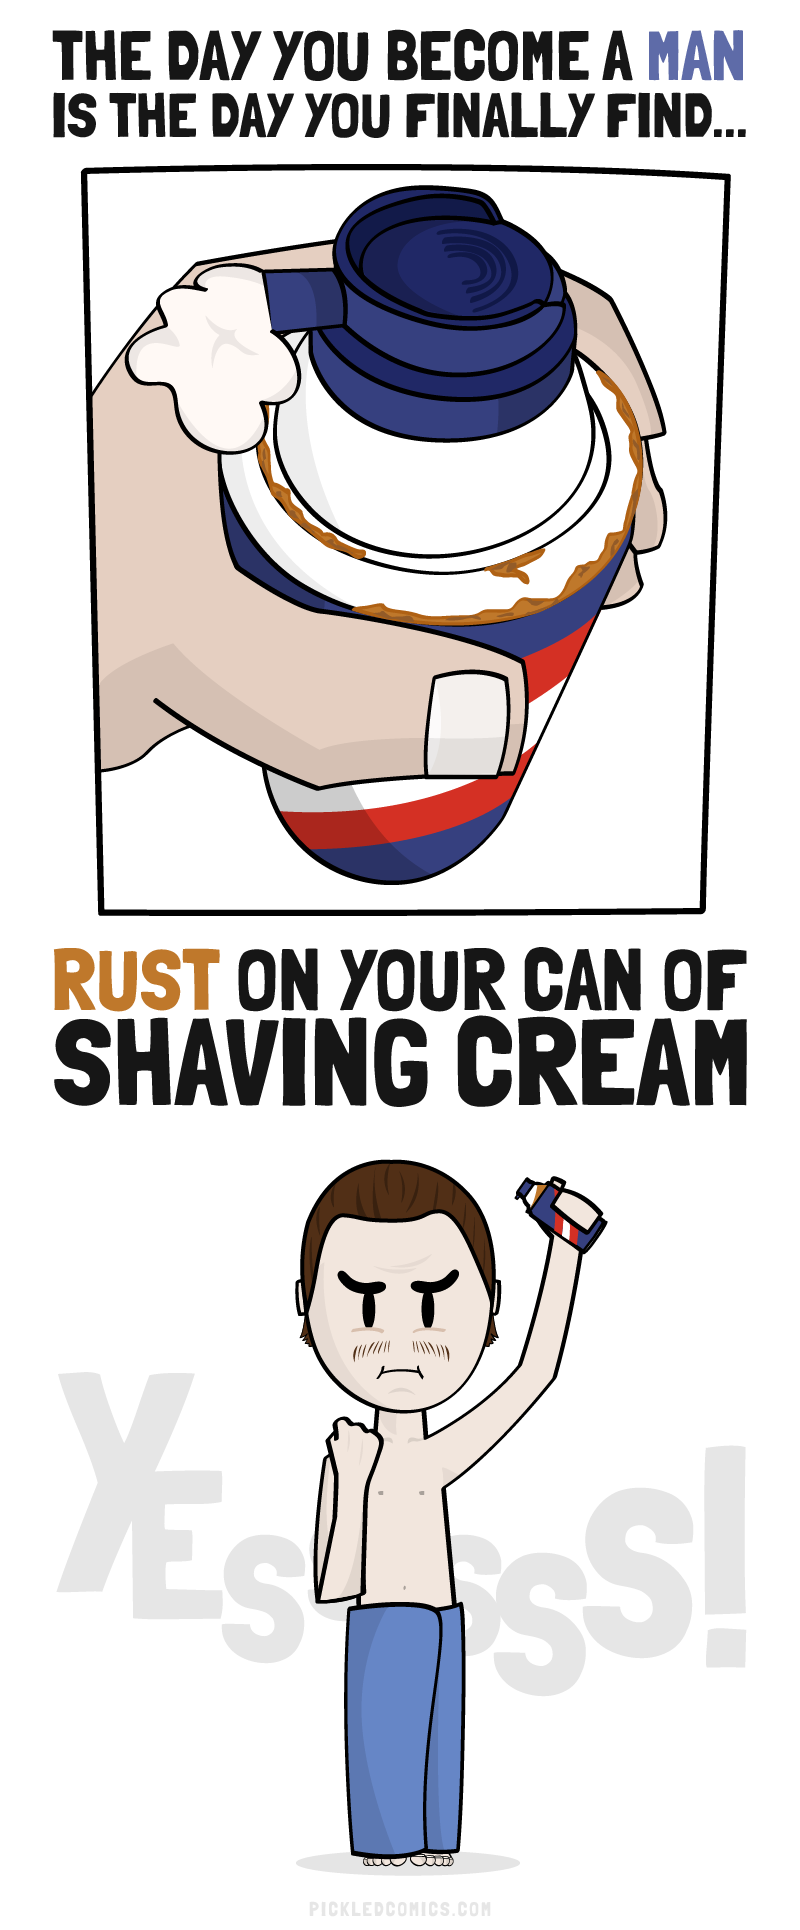 The day you become a man is the day you finally find rust on your can of shaving cream.